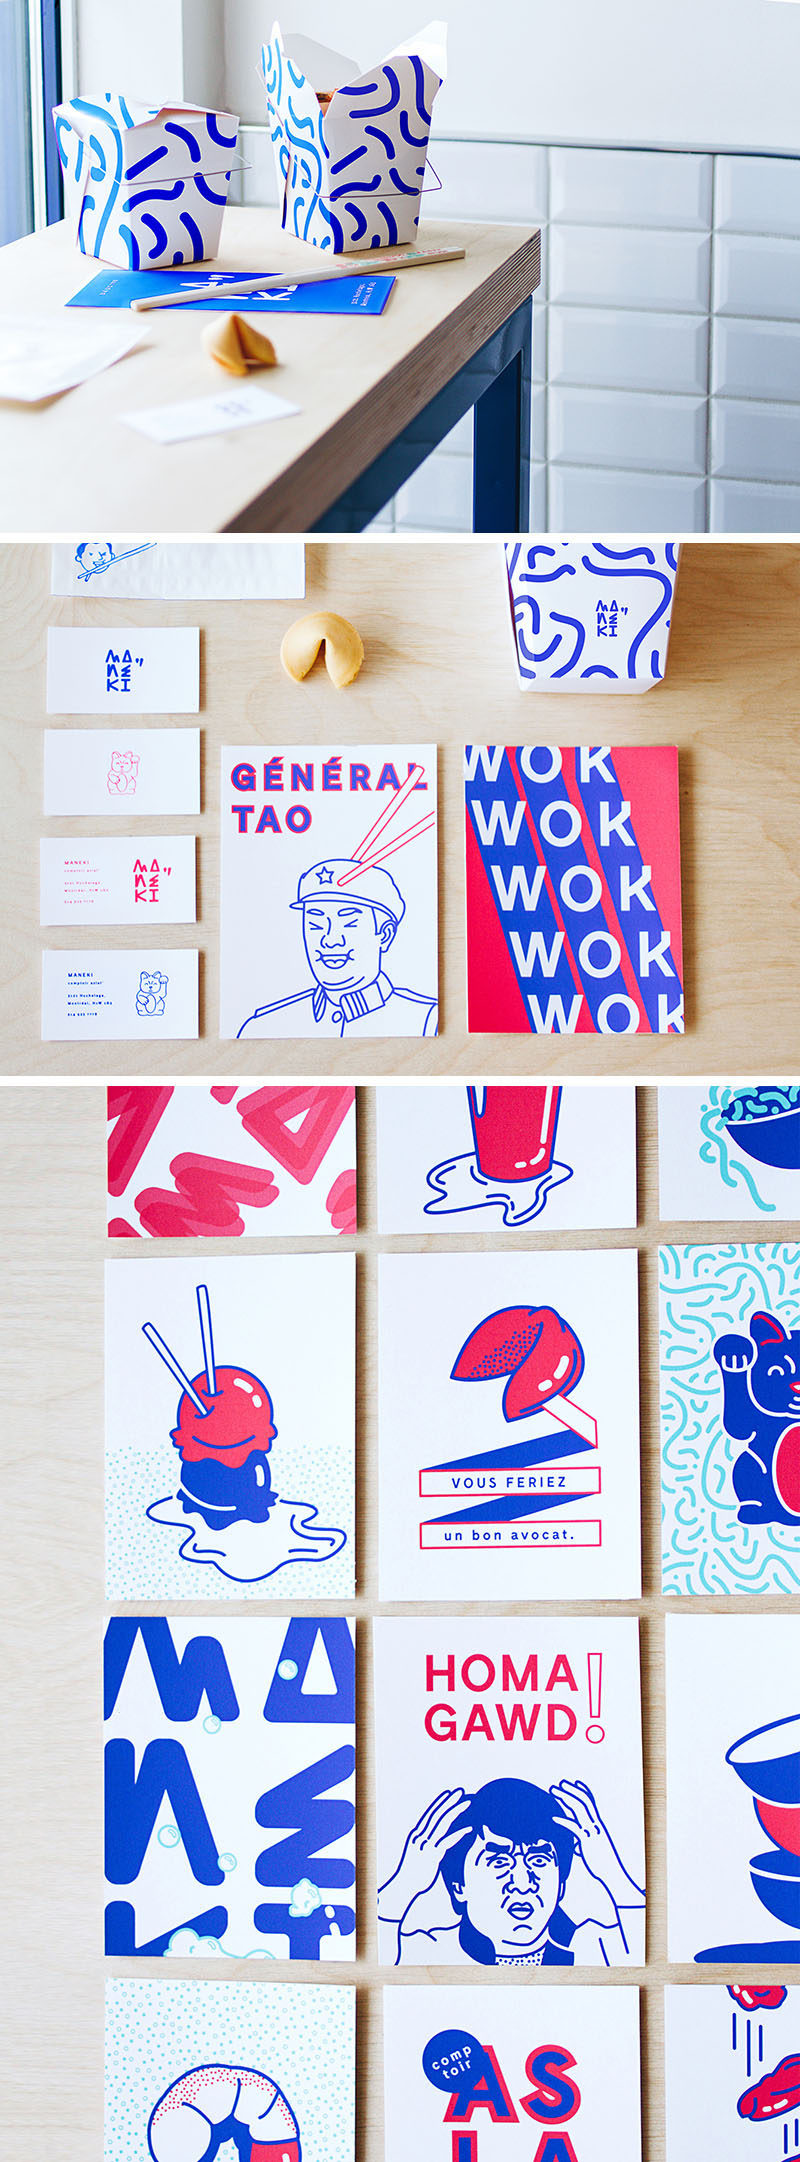 Sprinkled throughout this modern Asian restaurant are various pop art prints in a limited blue, white, and red color palette featuring famous Asian icons, songs, and food dishes. 